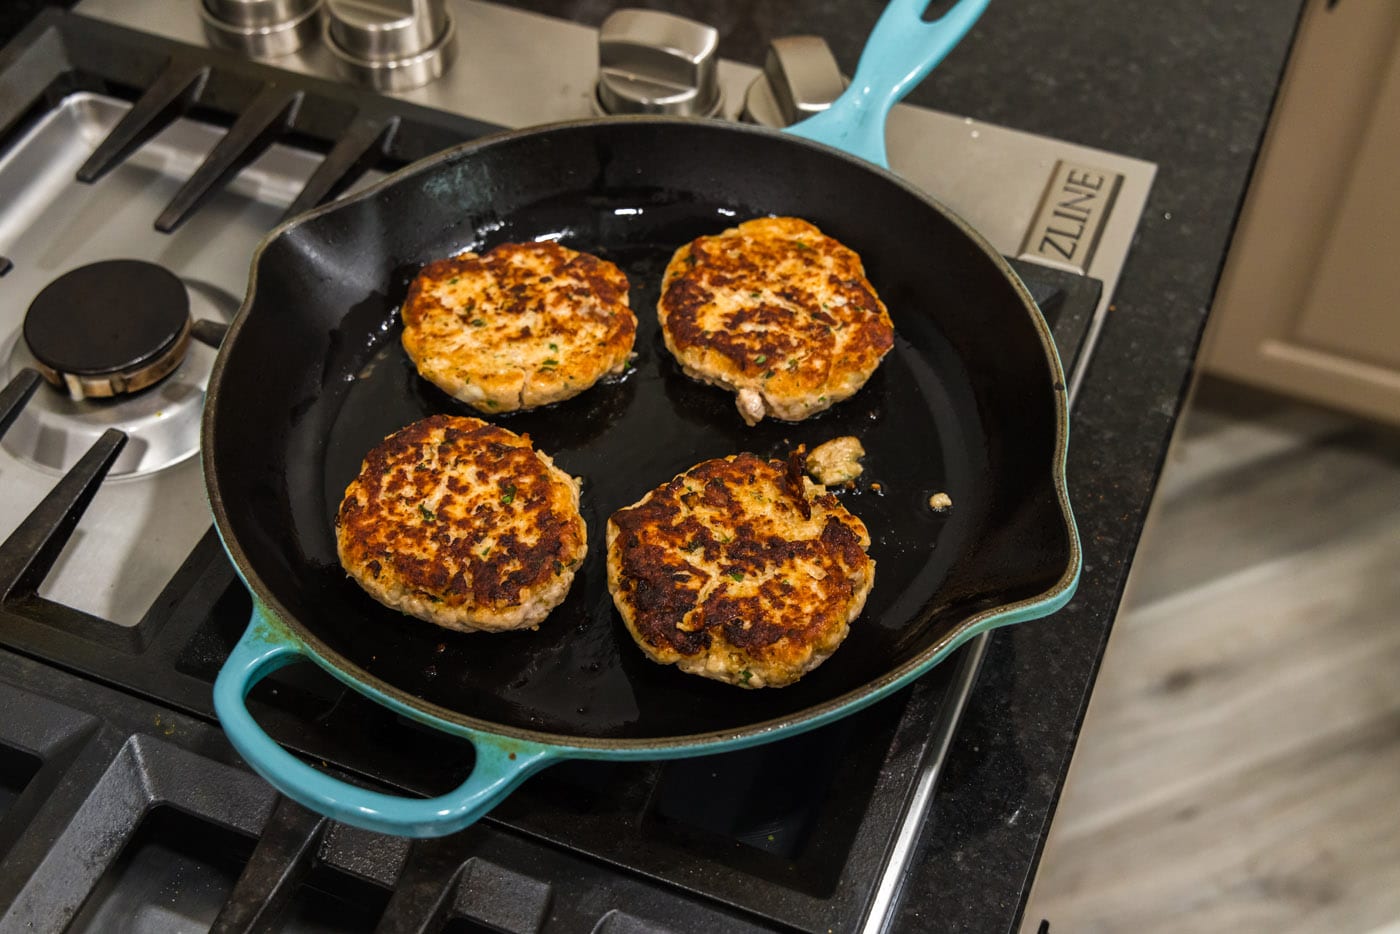 salmon burgers cooked on a skillet